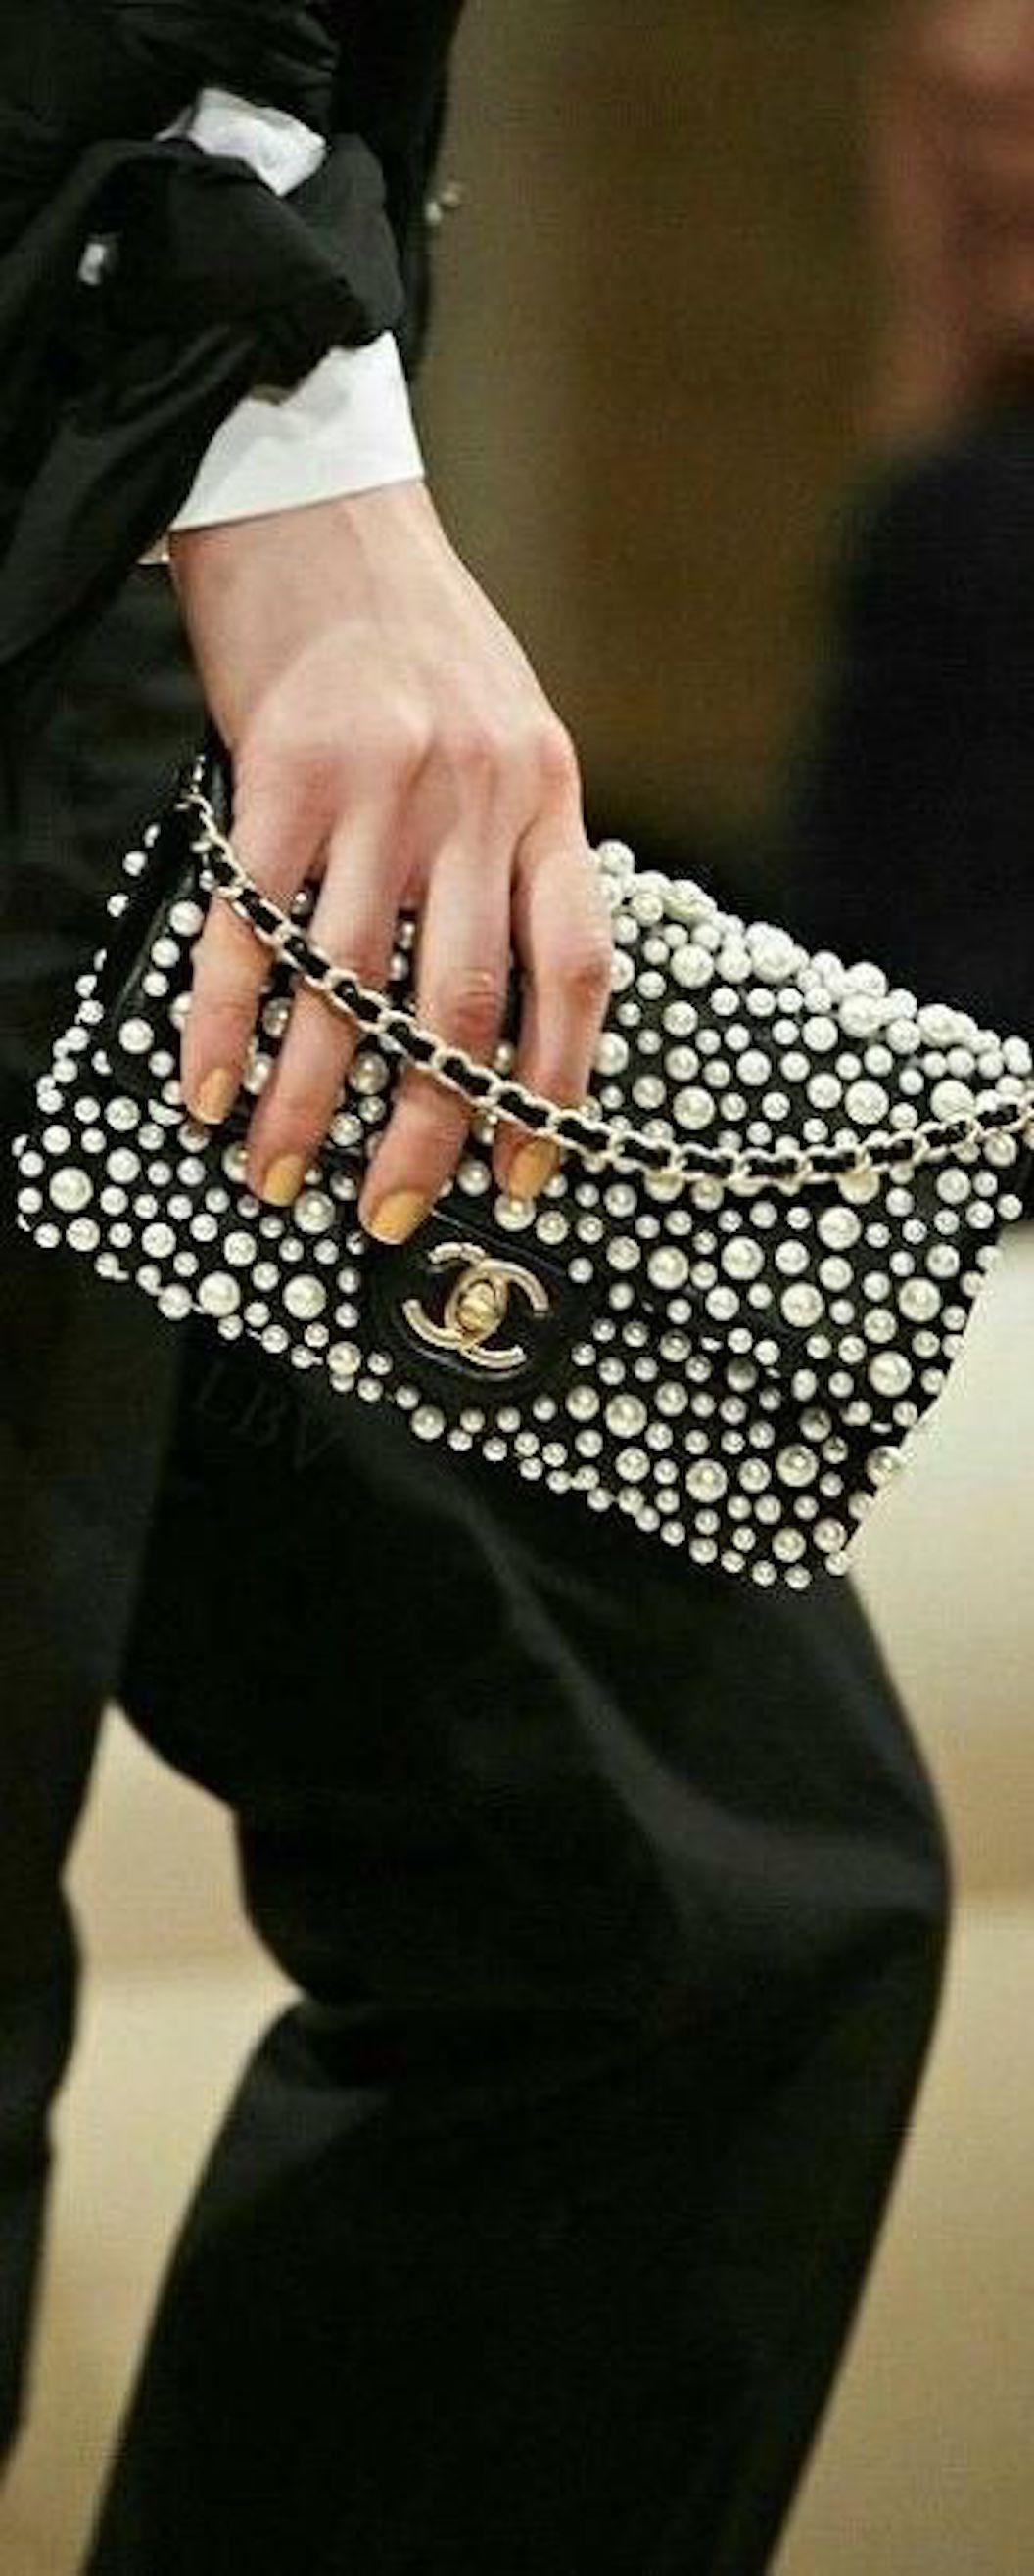 Add a Piece of the Chanel Runway to Your Life.

Straight off the 2015 Chanel Runway, this chic leather and faux pearl flap bag is a queen among princesses.  Produced by Chanel in limited quantities, it is the ideal addition to a serious Chanel